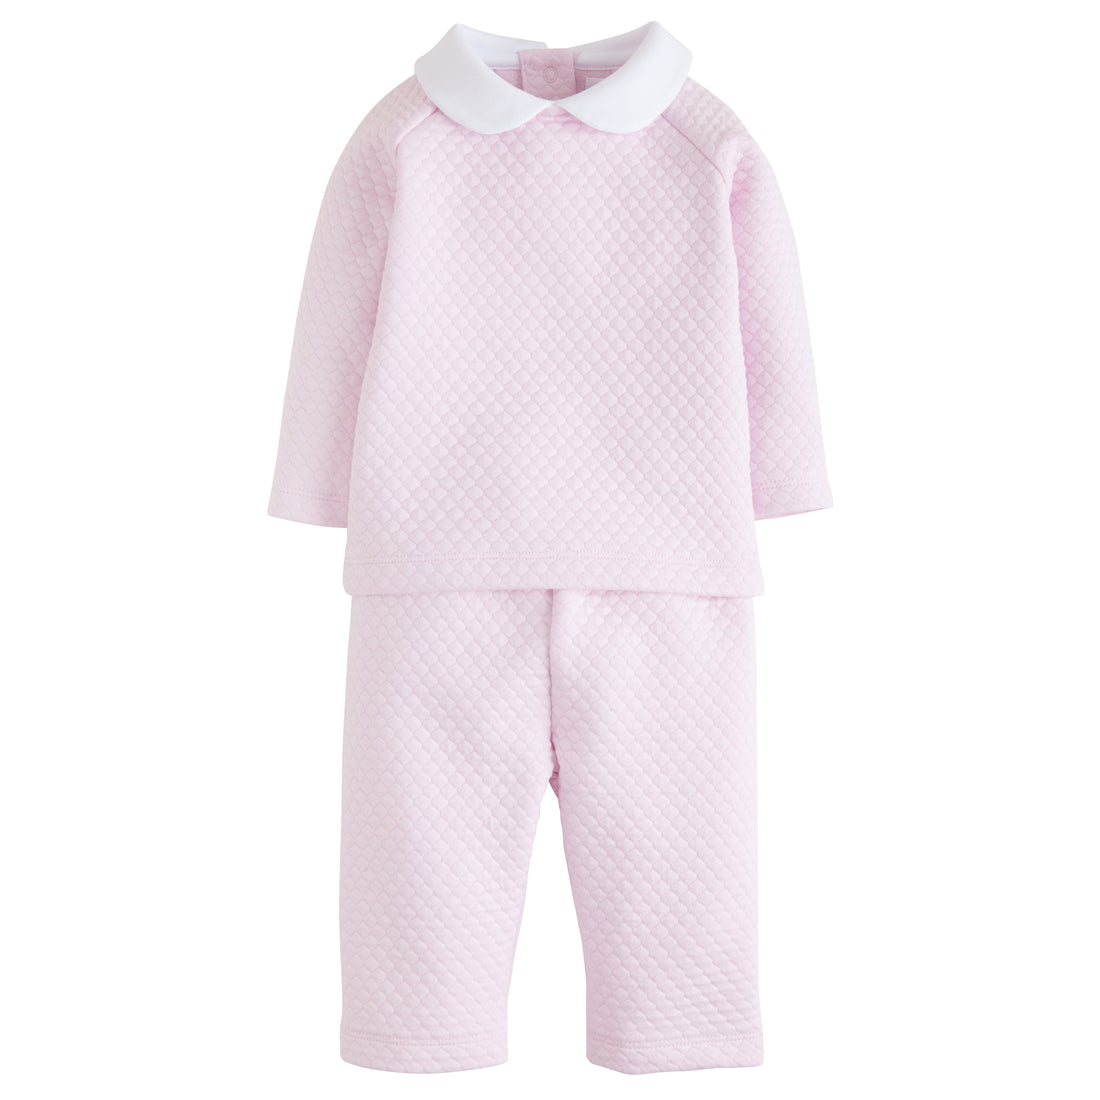 Little English traditional baby clothing, little girl&